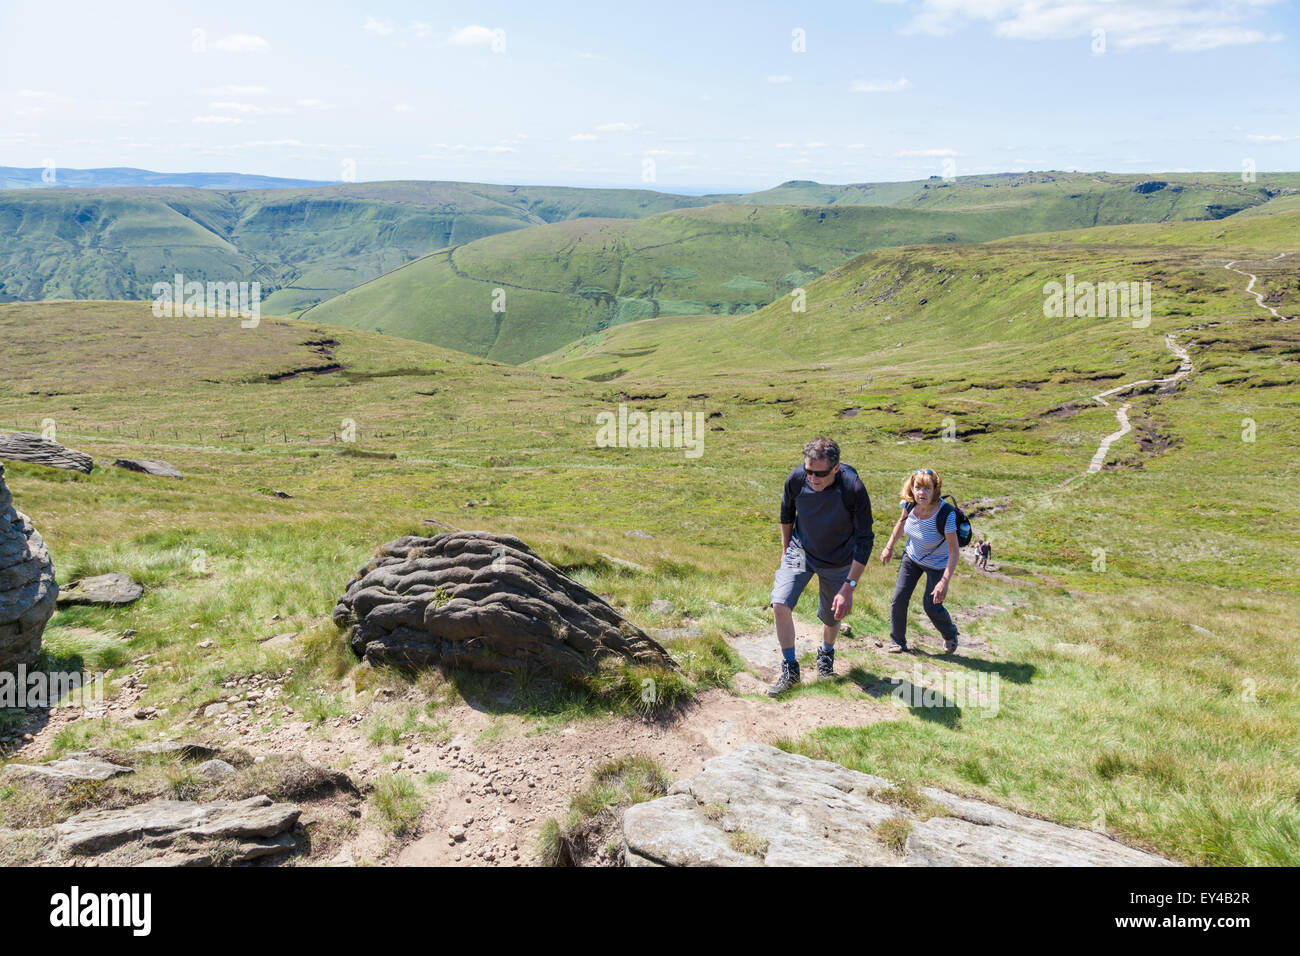 People hiking, UK countryside in Summer. Two hikers walking up the hill at Grindslow Knoll on Kinder Scout, Derbyshire, Peak District, England, UK Stock Photo